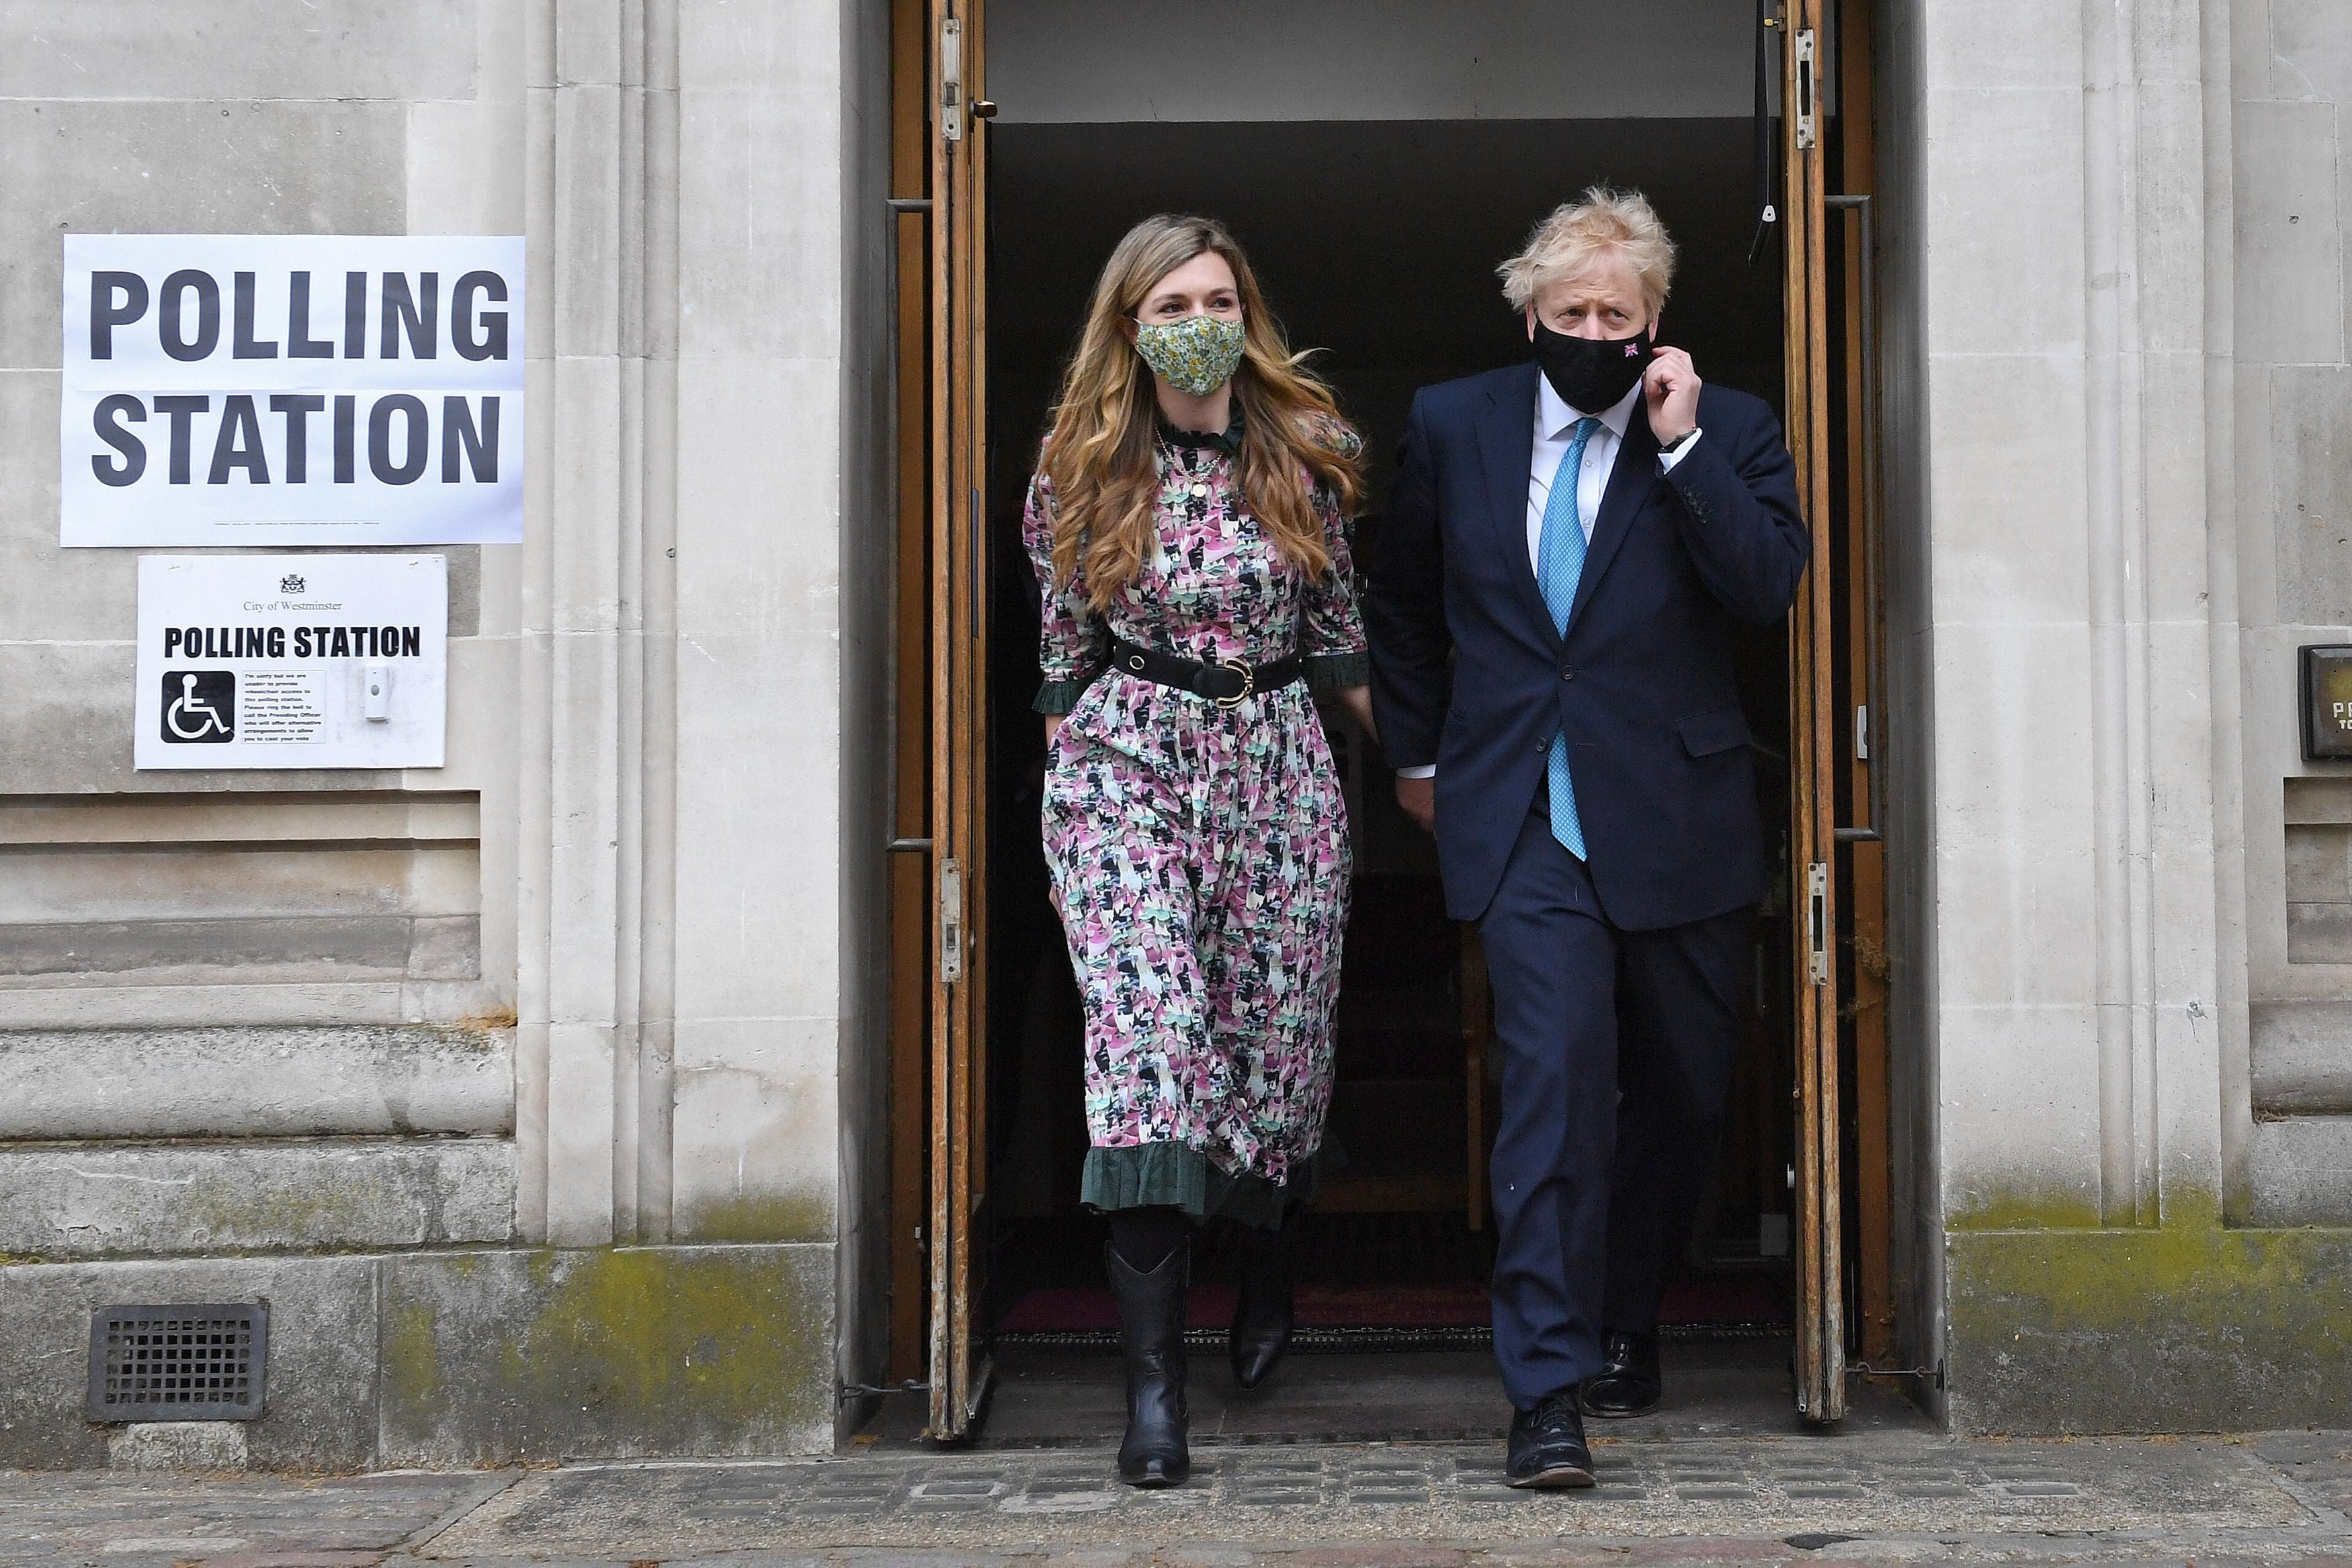 The PM and his fiancee Carrie Symonds leave after casting their vote at Methodist Central Hall, central London